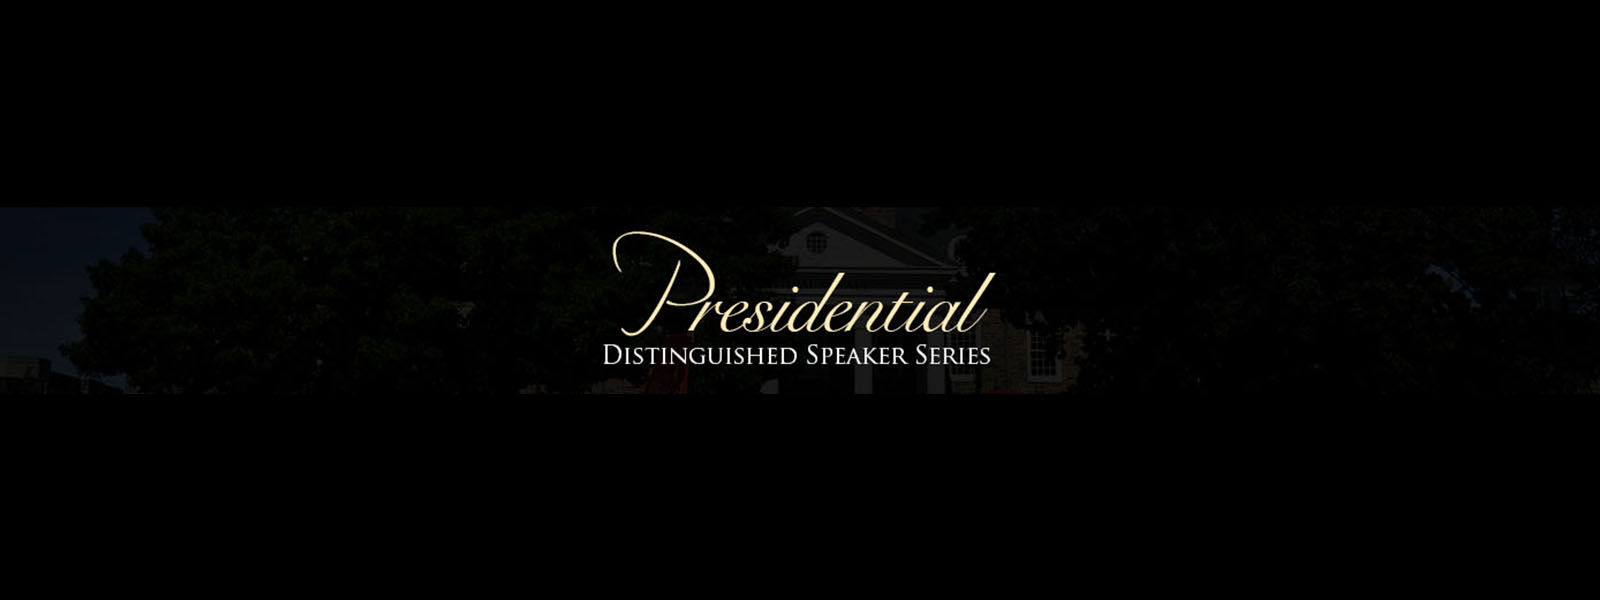 Presidential Speakers Series title on a black background